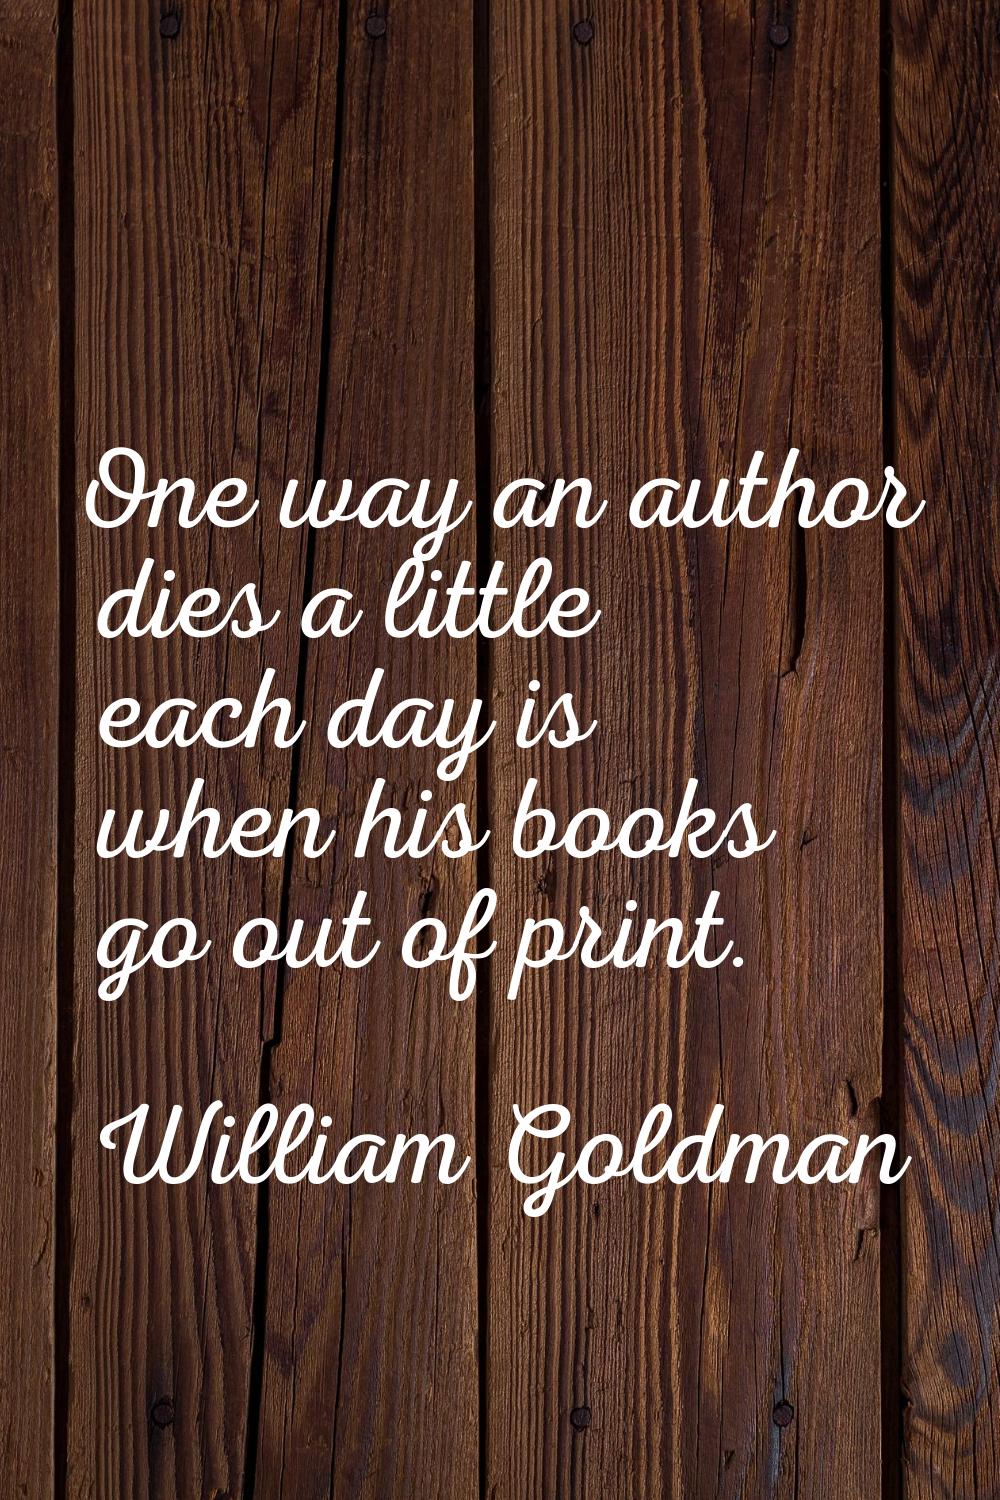 One way an author dies a little each day is when his books go out of print.